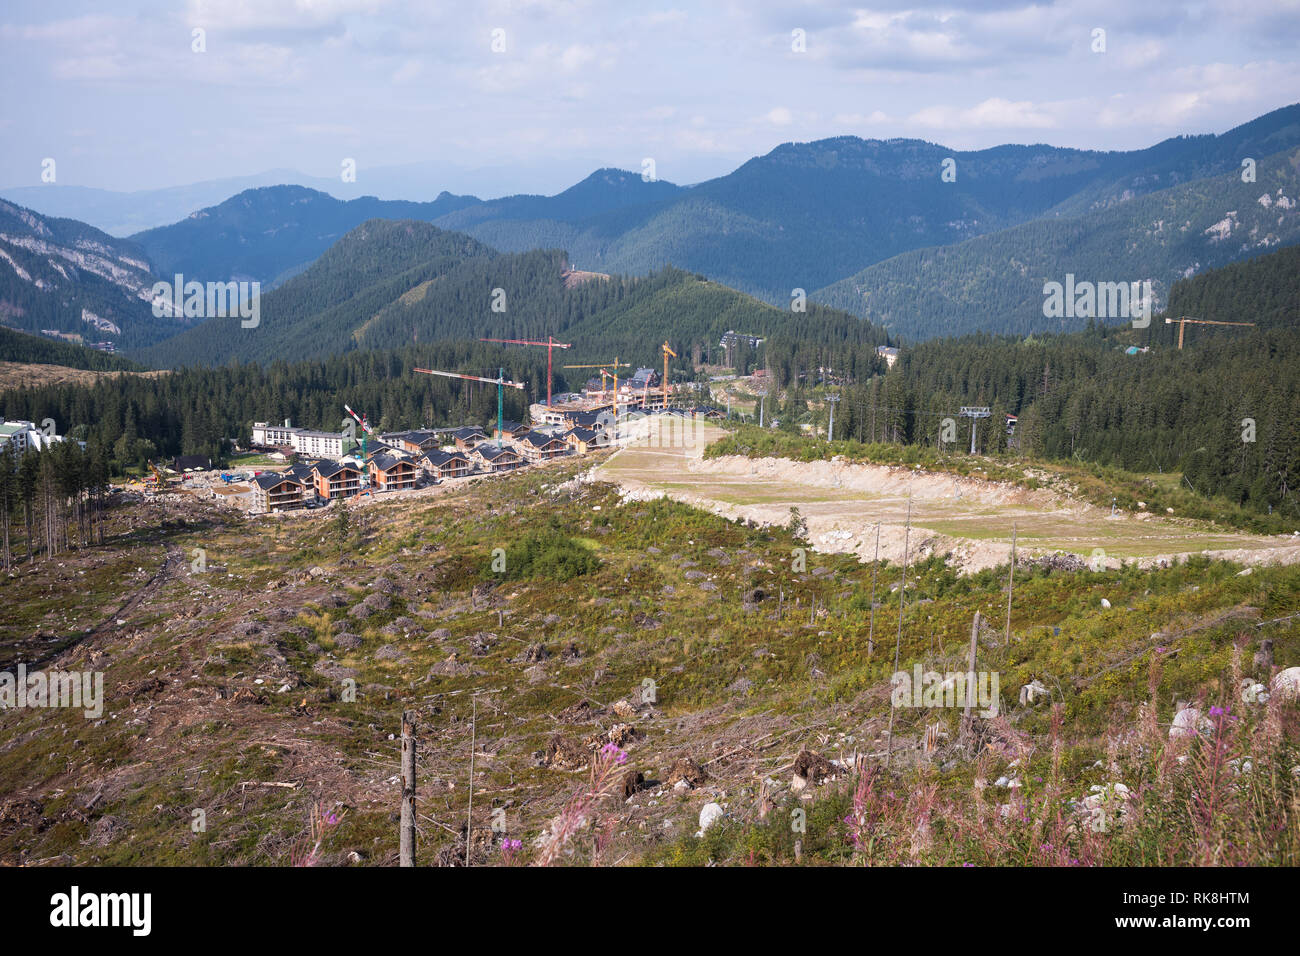 View from Mount Chopok on a Summer Day, ski and hiking resort Jasna, Low Tatras National Park, Slovakia Stock Photo